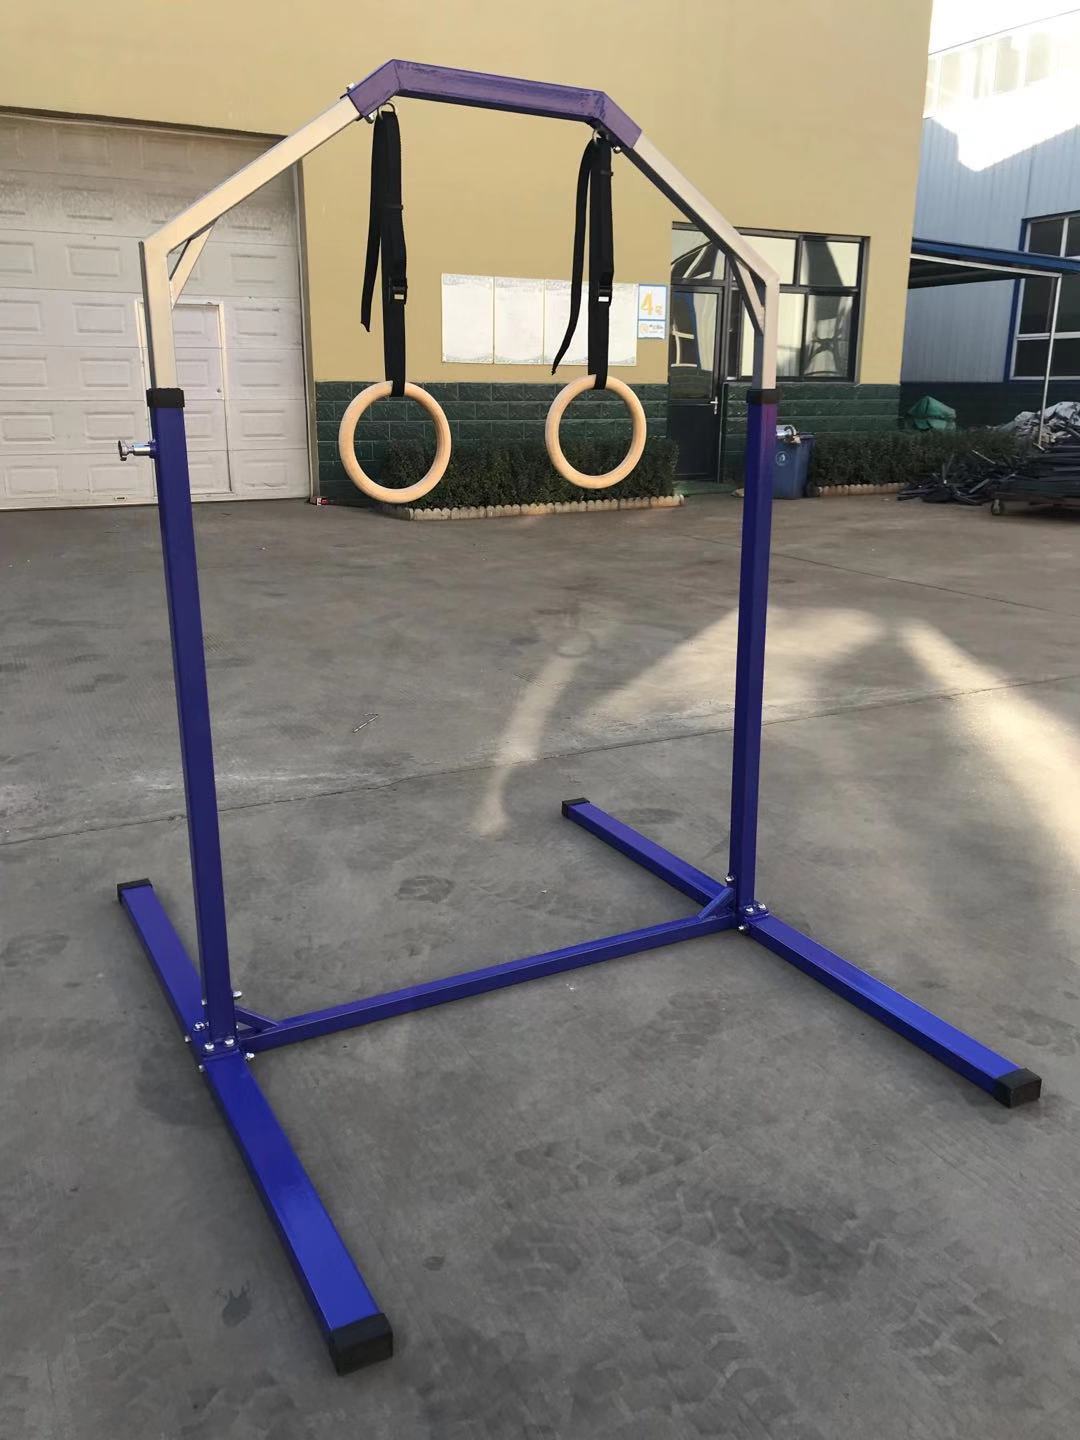 Custom Kids Gym Equipment Wooden Gymnastic Rings For Sale